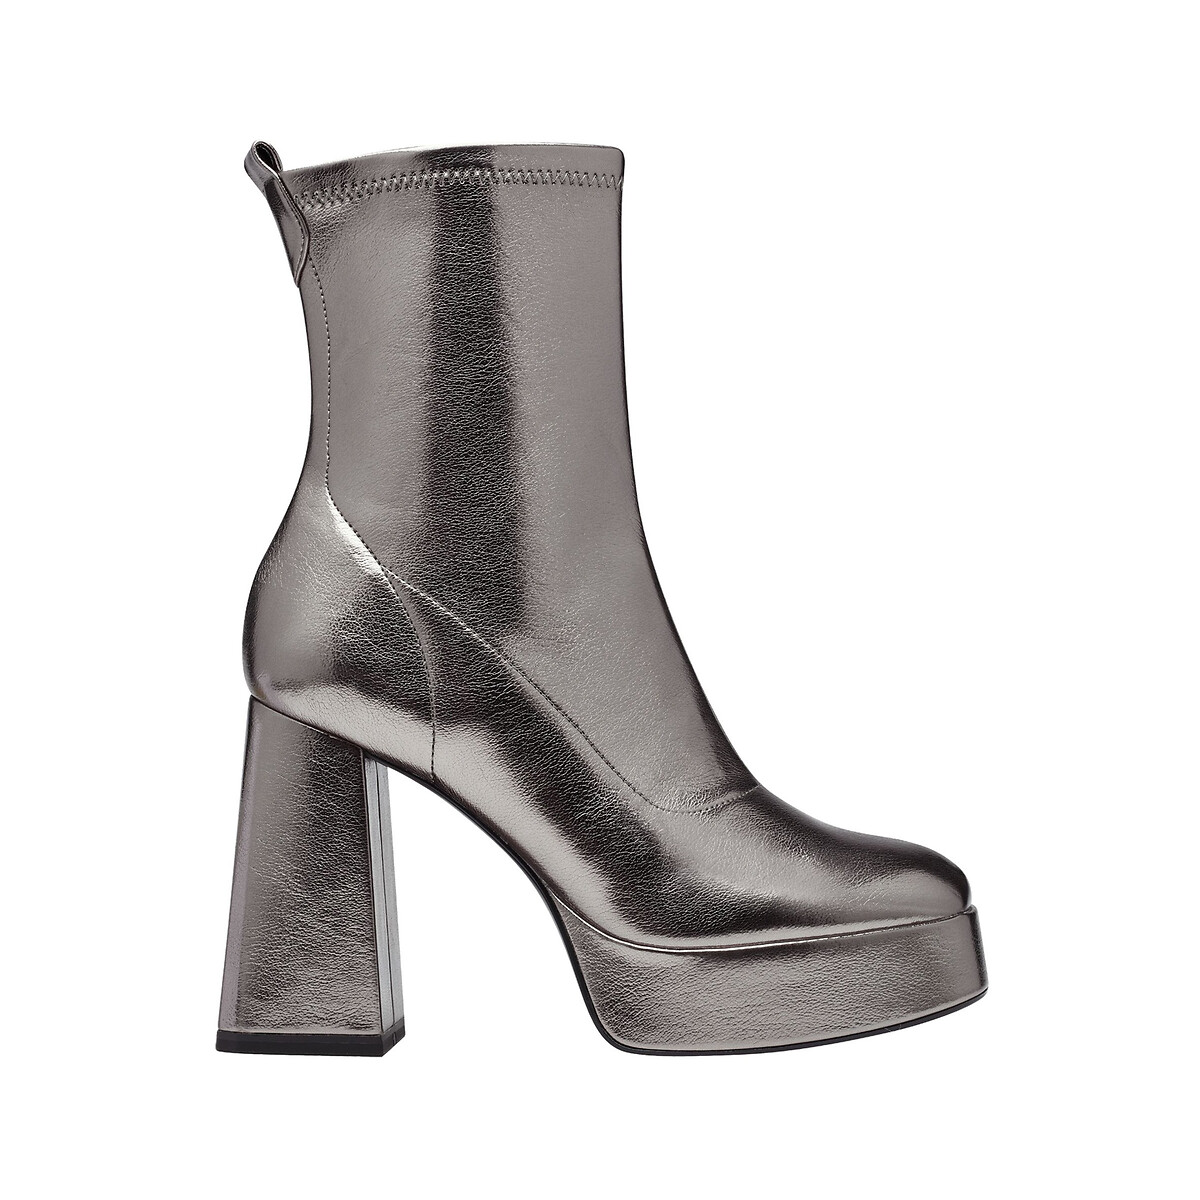 Just Cavalli Women's Gray Leather High Heel Ankle Boots Shoes